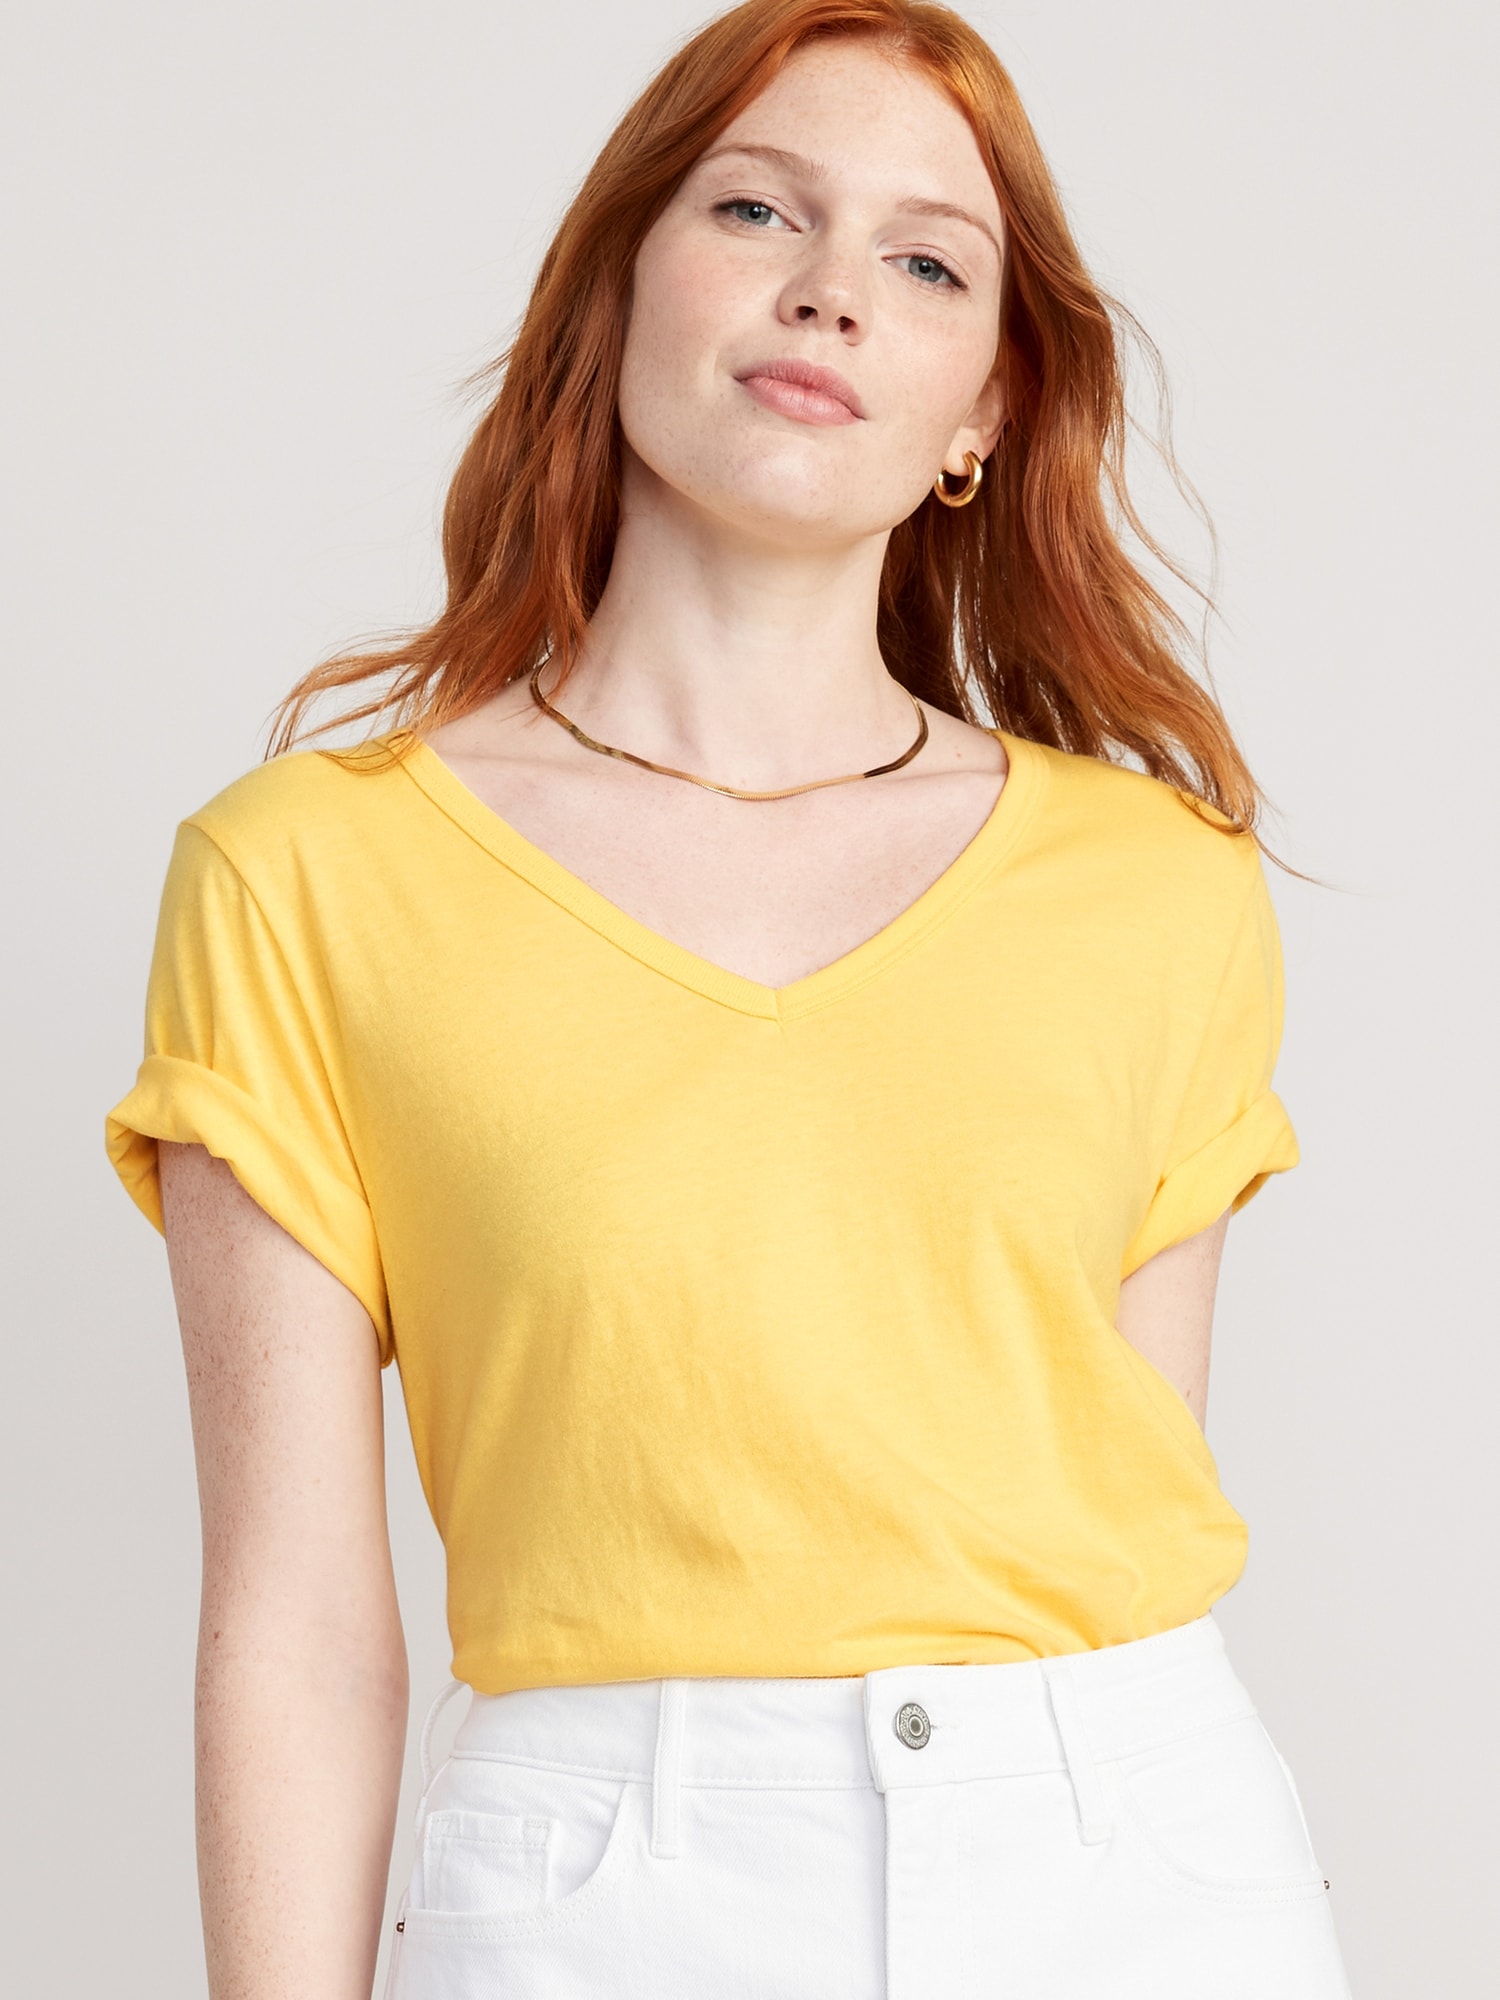 Old Navy EveryWear V-Neck T-Shirt for Women yellow. 1